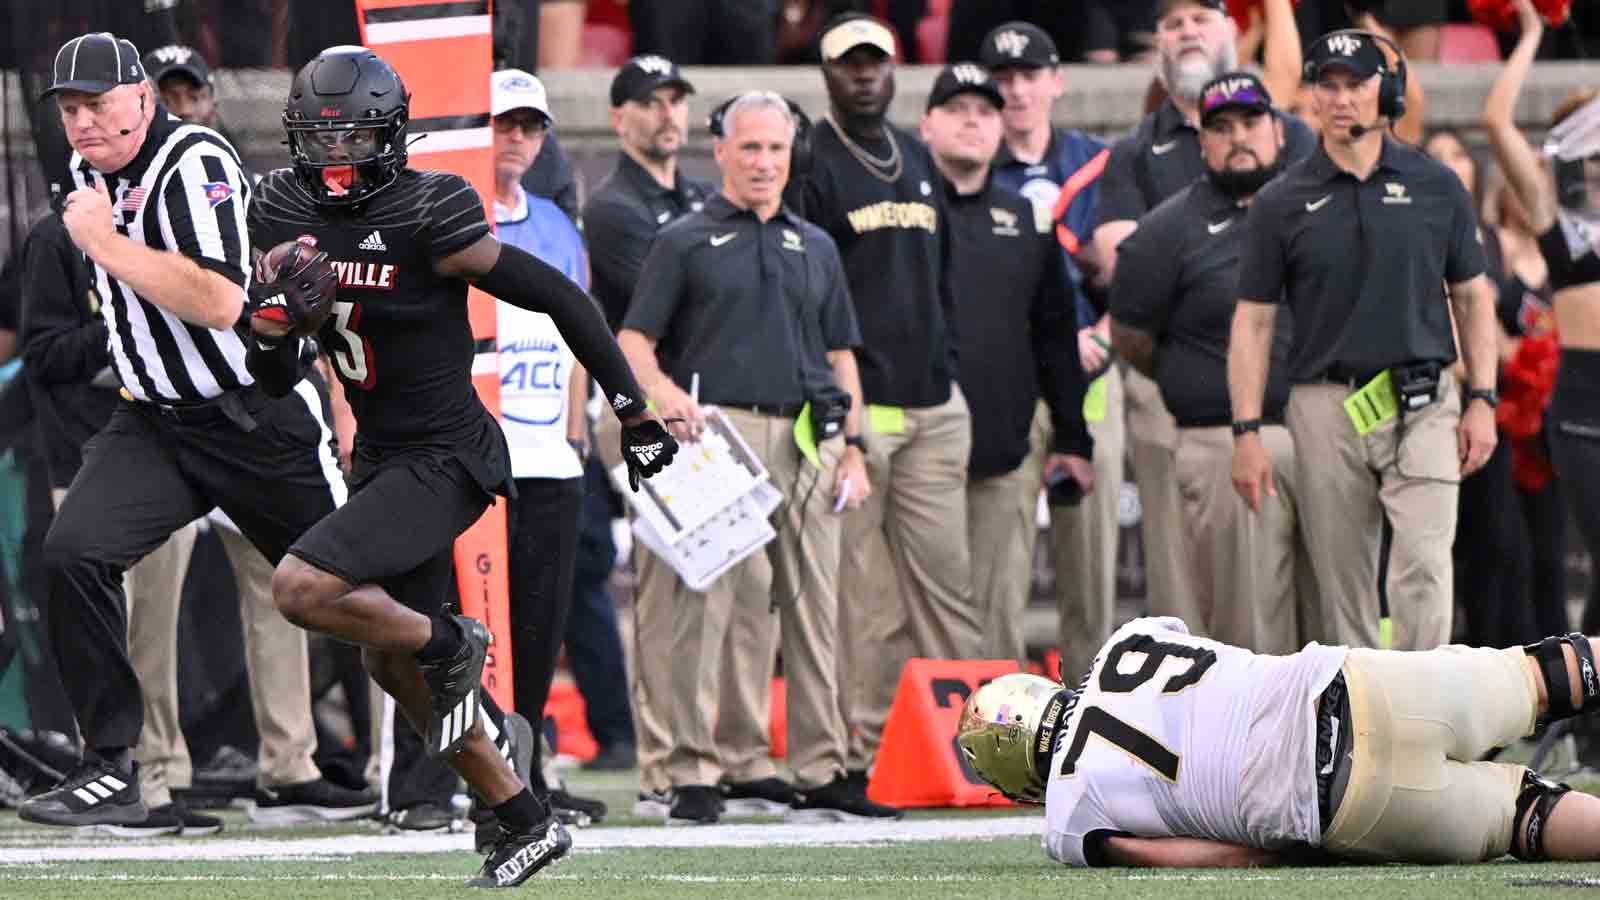 Wake Forest Commits Six Third-Quarter Turnovers in Loss to Louisville